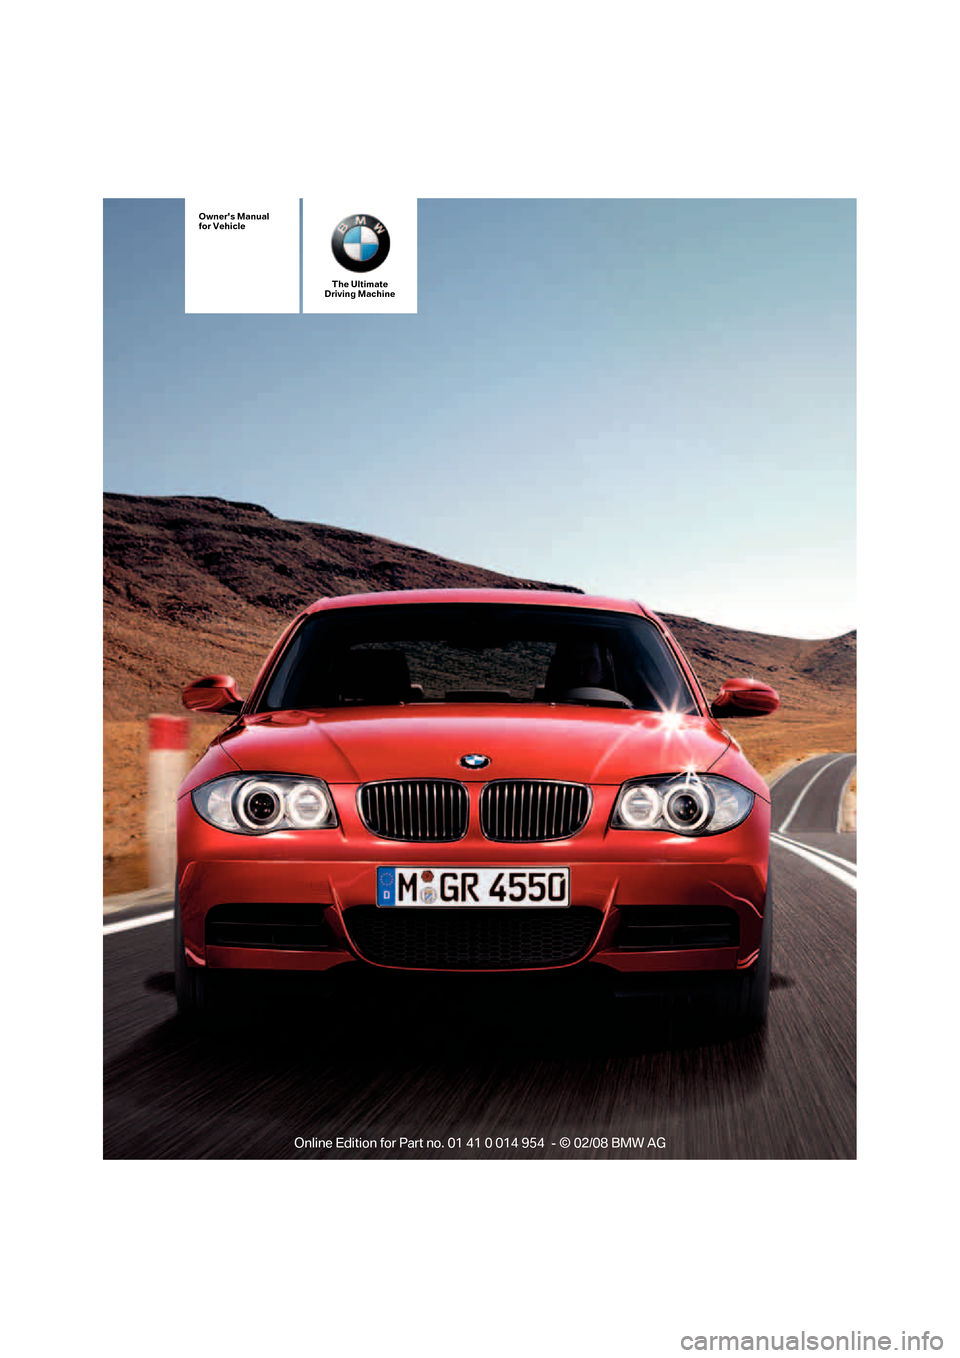 BMW 135I CONVERTIBLE 2008 E88 Owners Manual The Ultimate
Driving Machine
Owners Manual
for Vehicle 